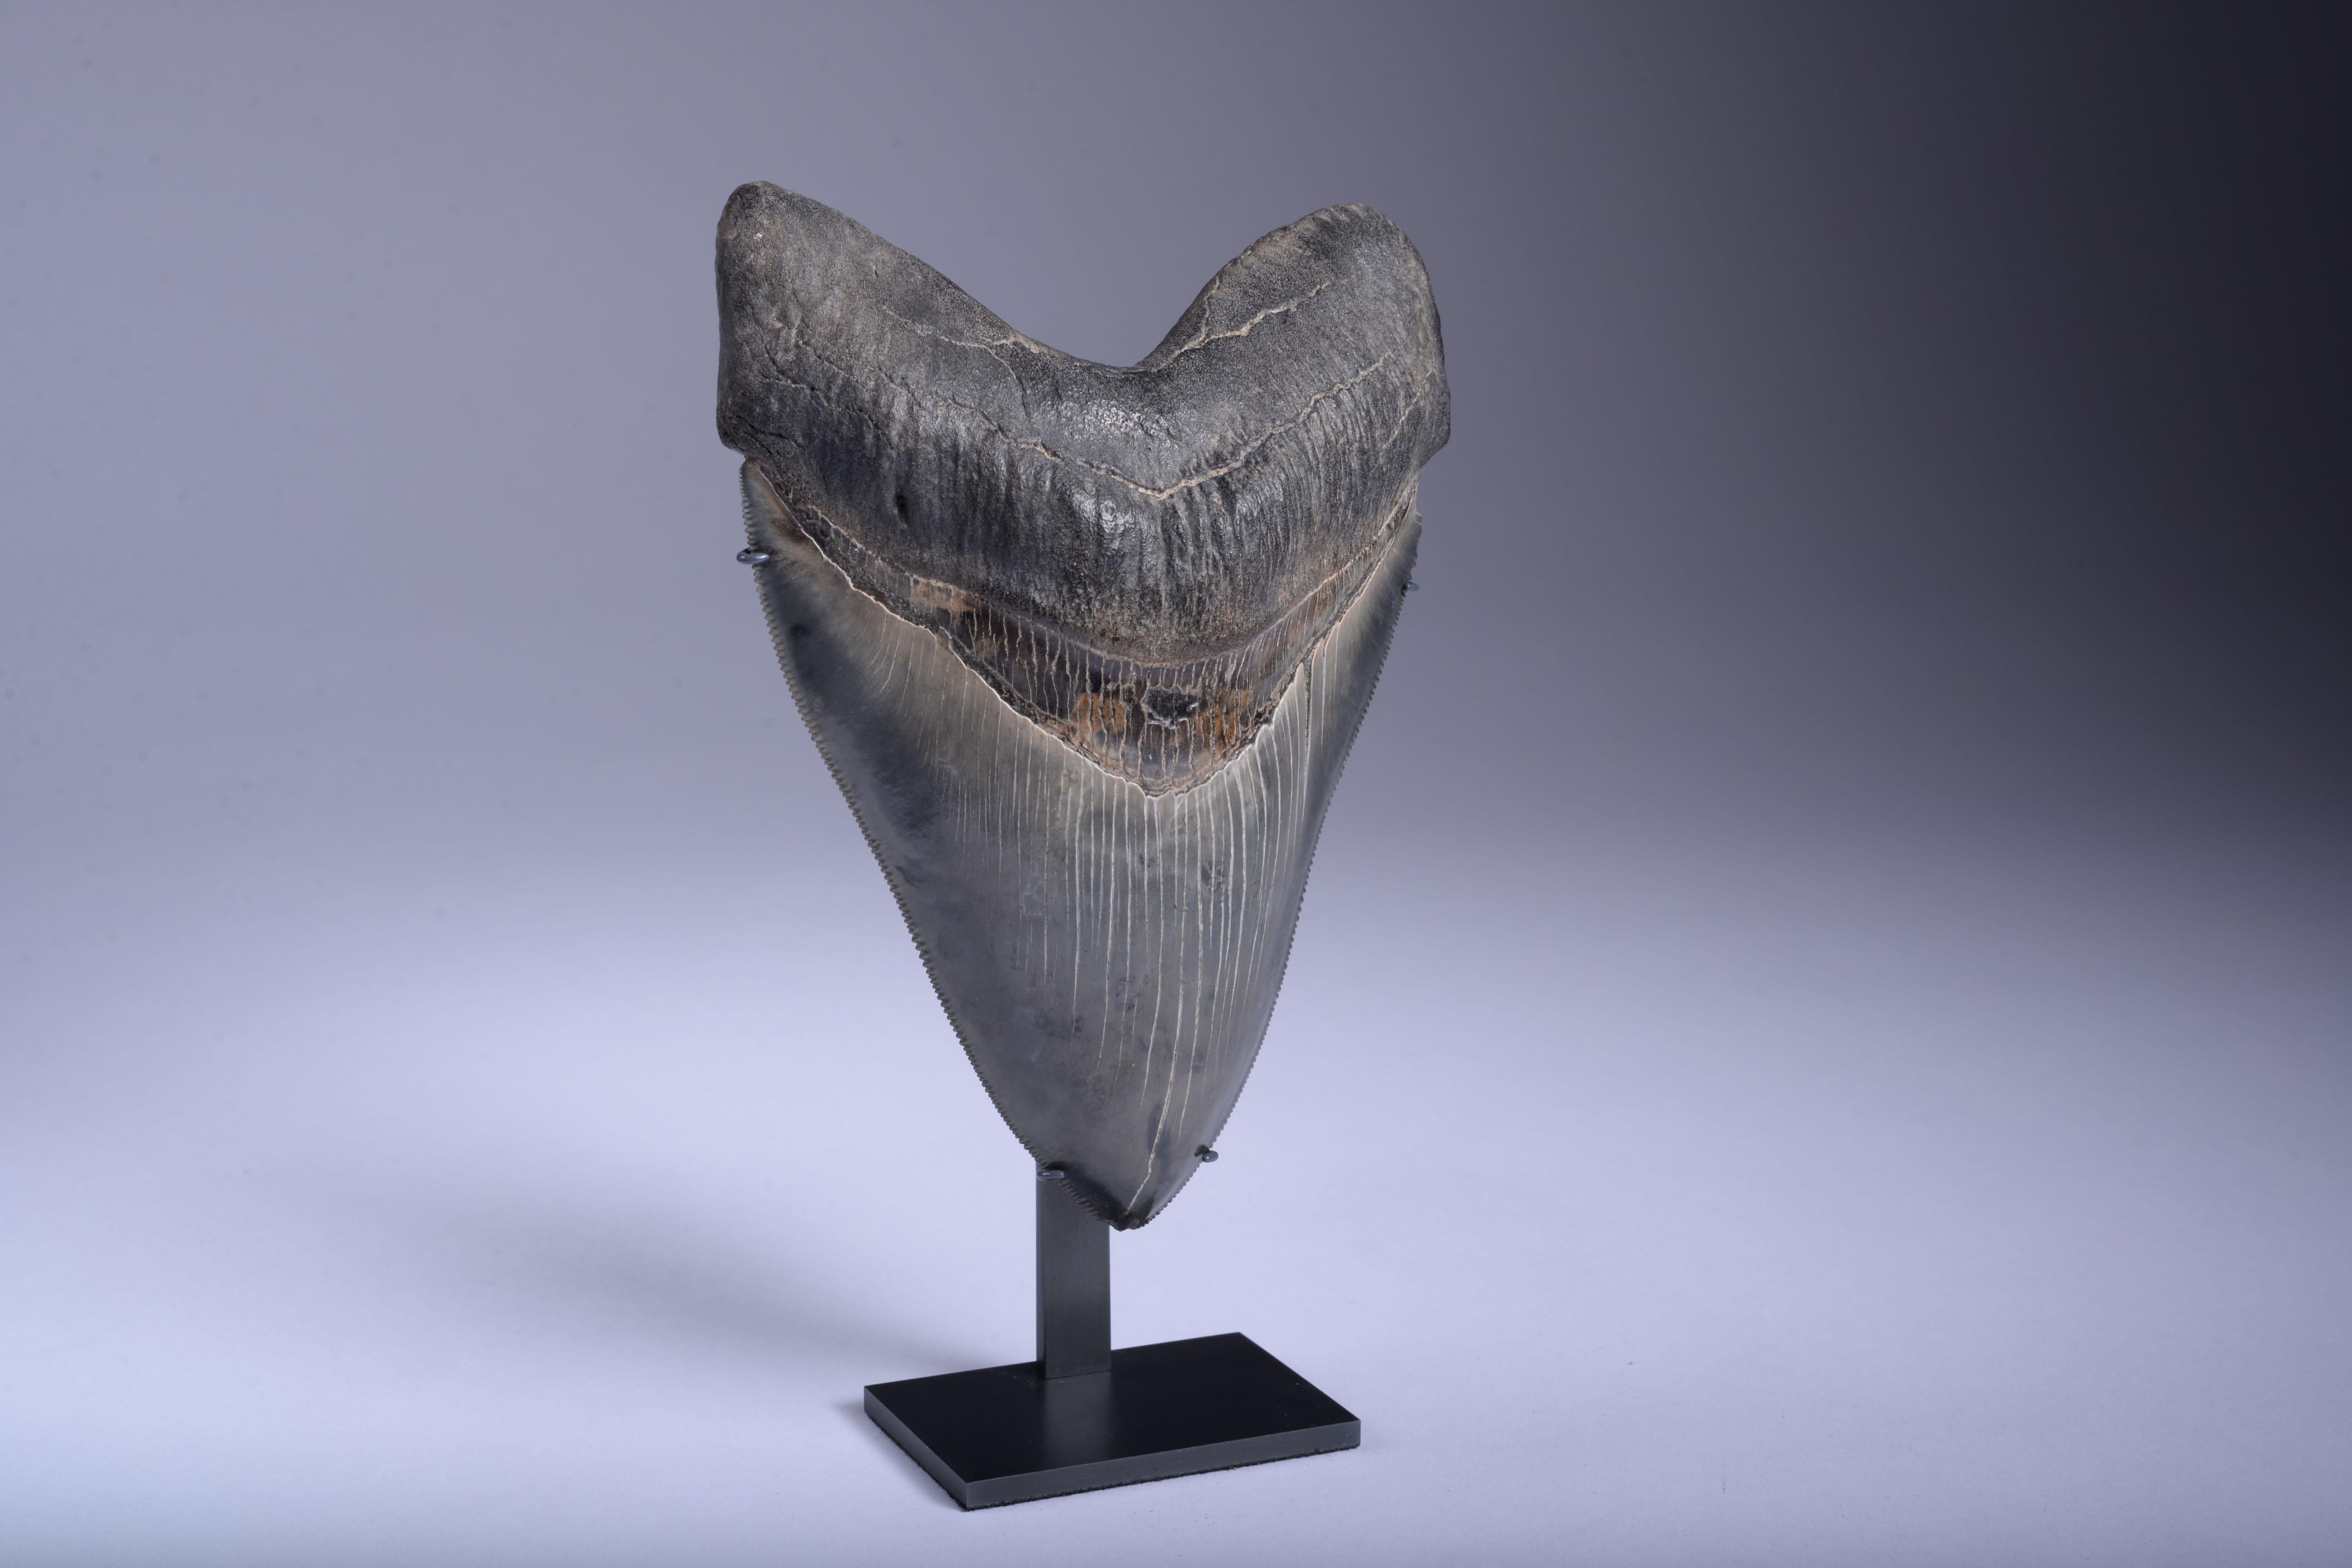 how big is a megalodon tooth